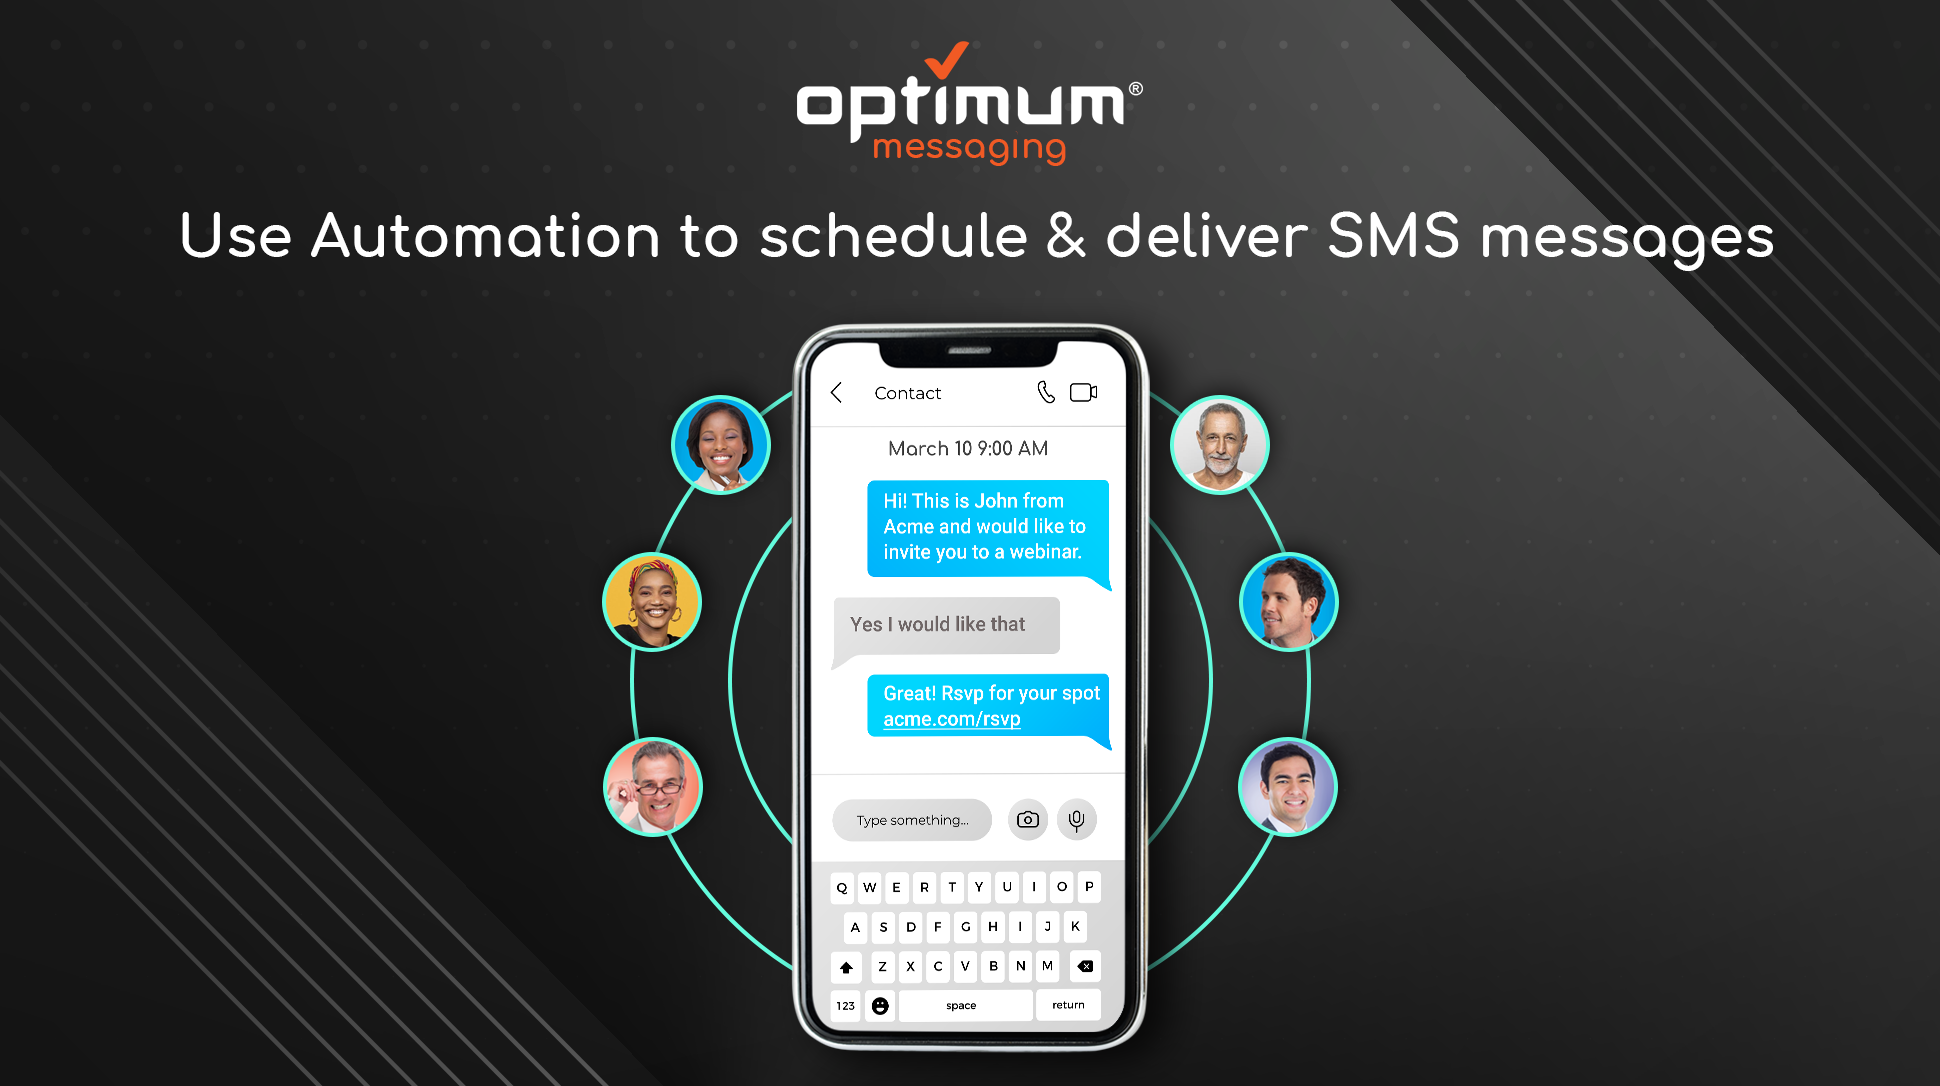 Easily schedule and deliver personalized SMS messages to your customers at the perfect time. You can set up automated campaigns, segment your audience, and tailor your messages to match your brand's voice and tone.